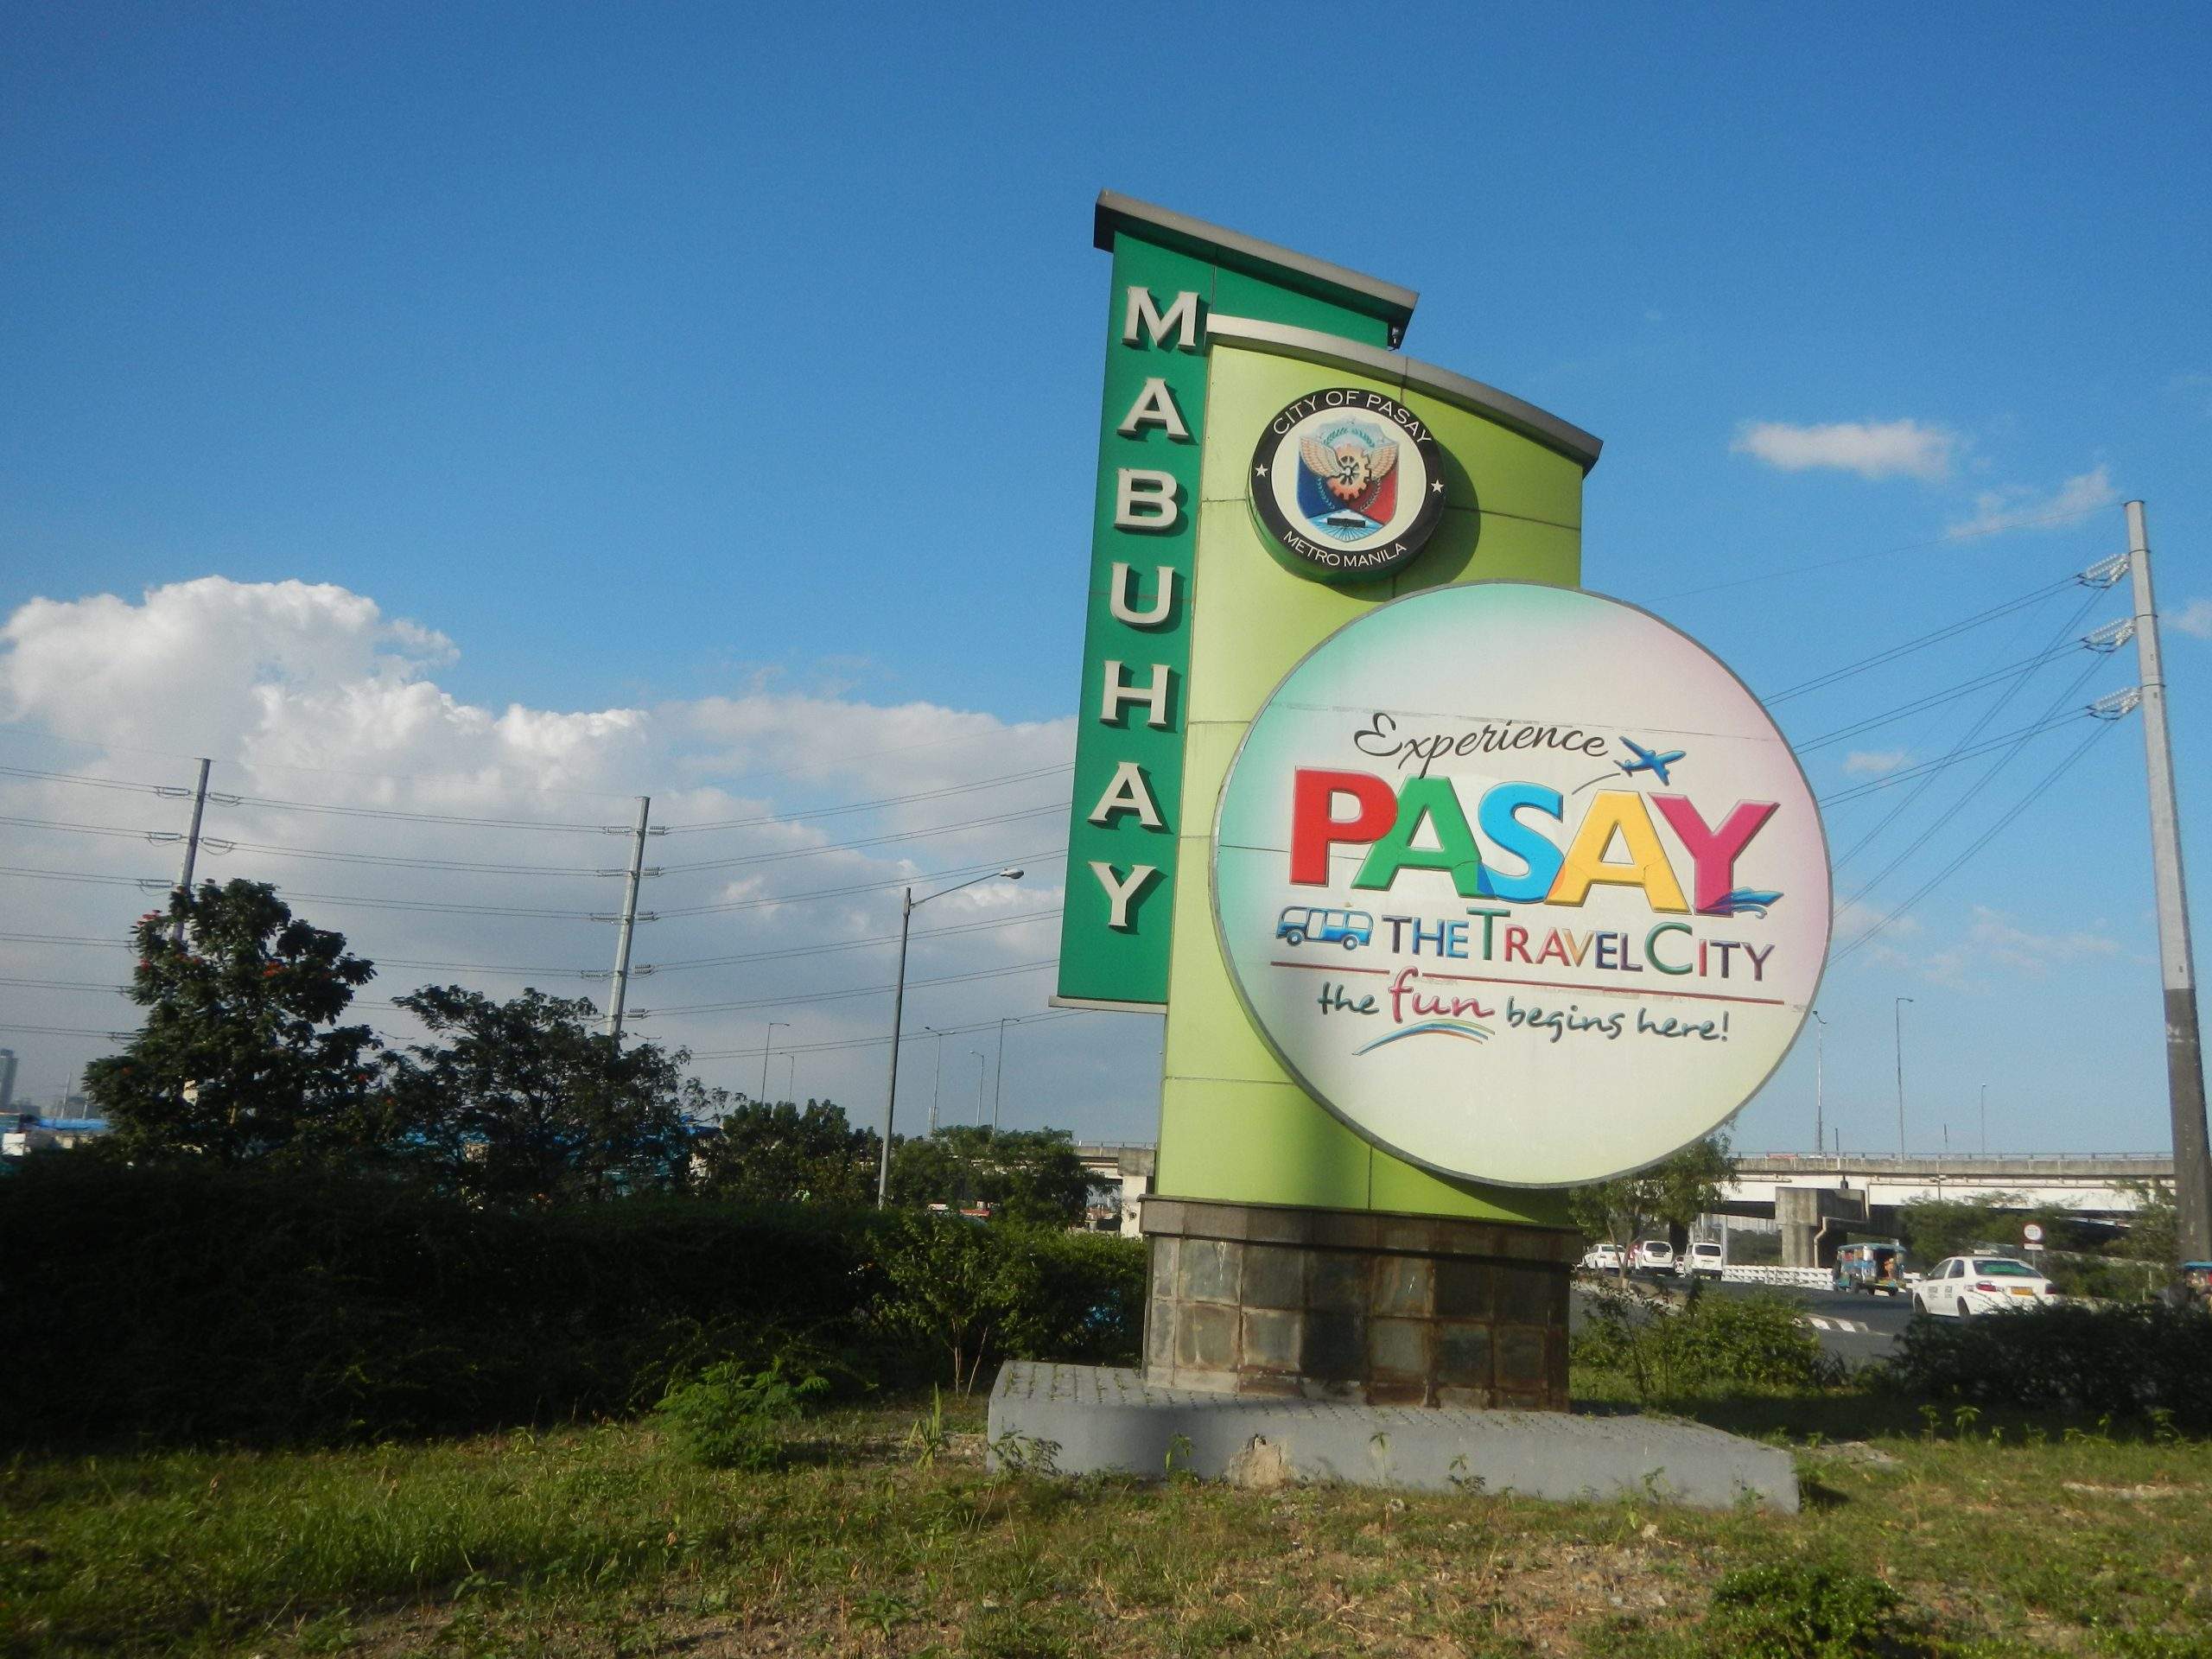 Pasay City: More Than Just a Stopover, A Destination on Its Own